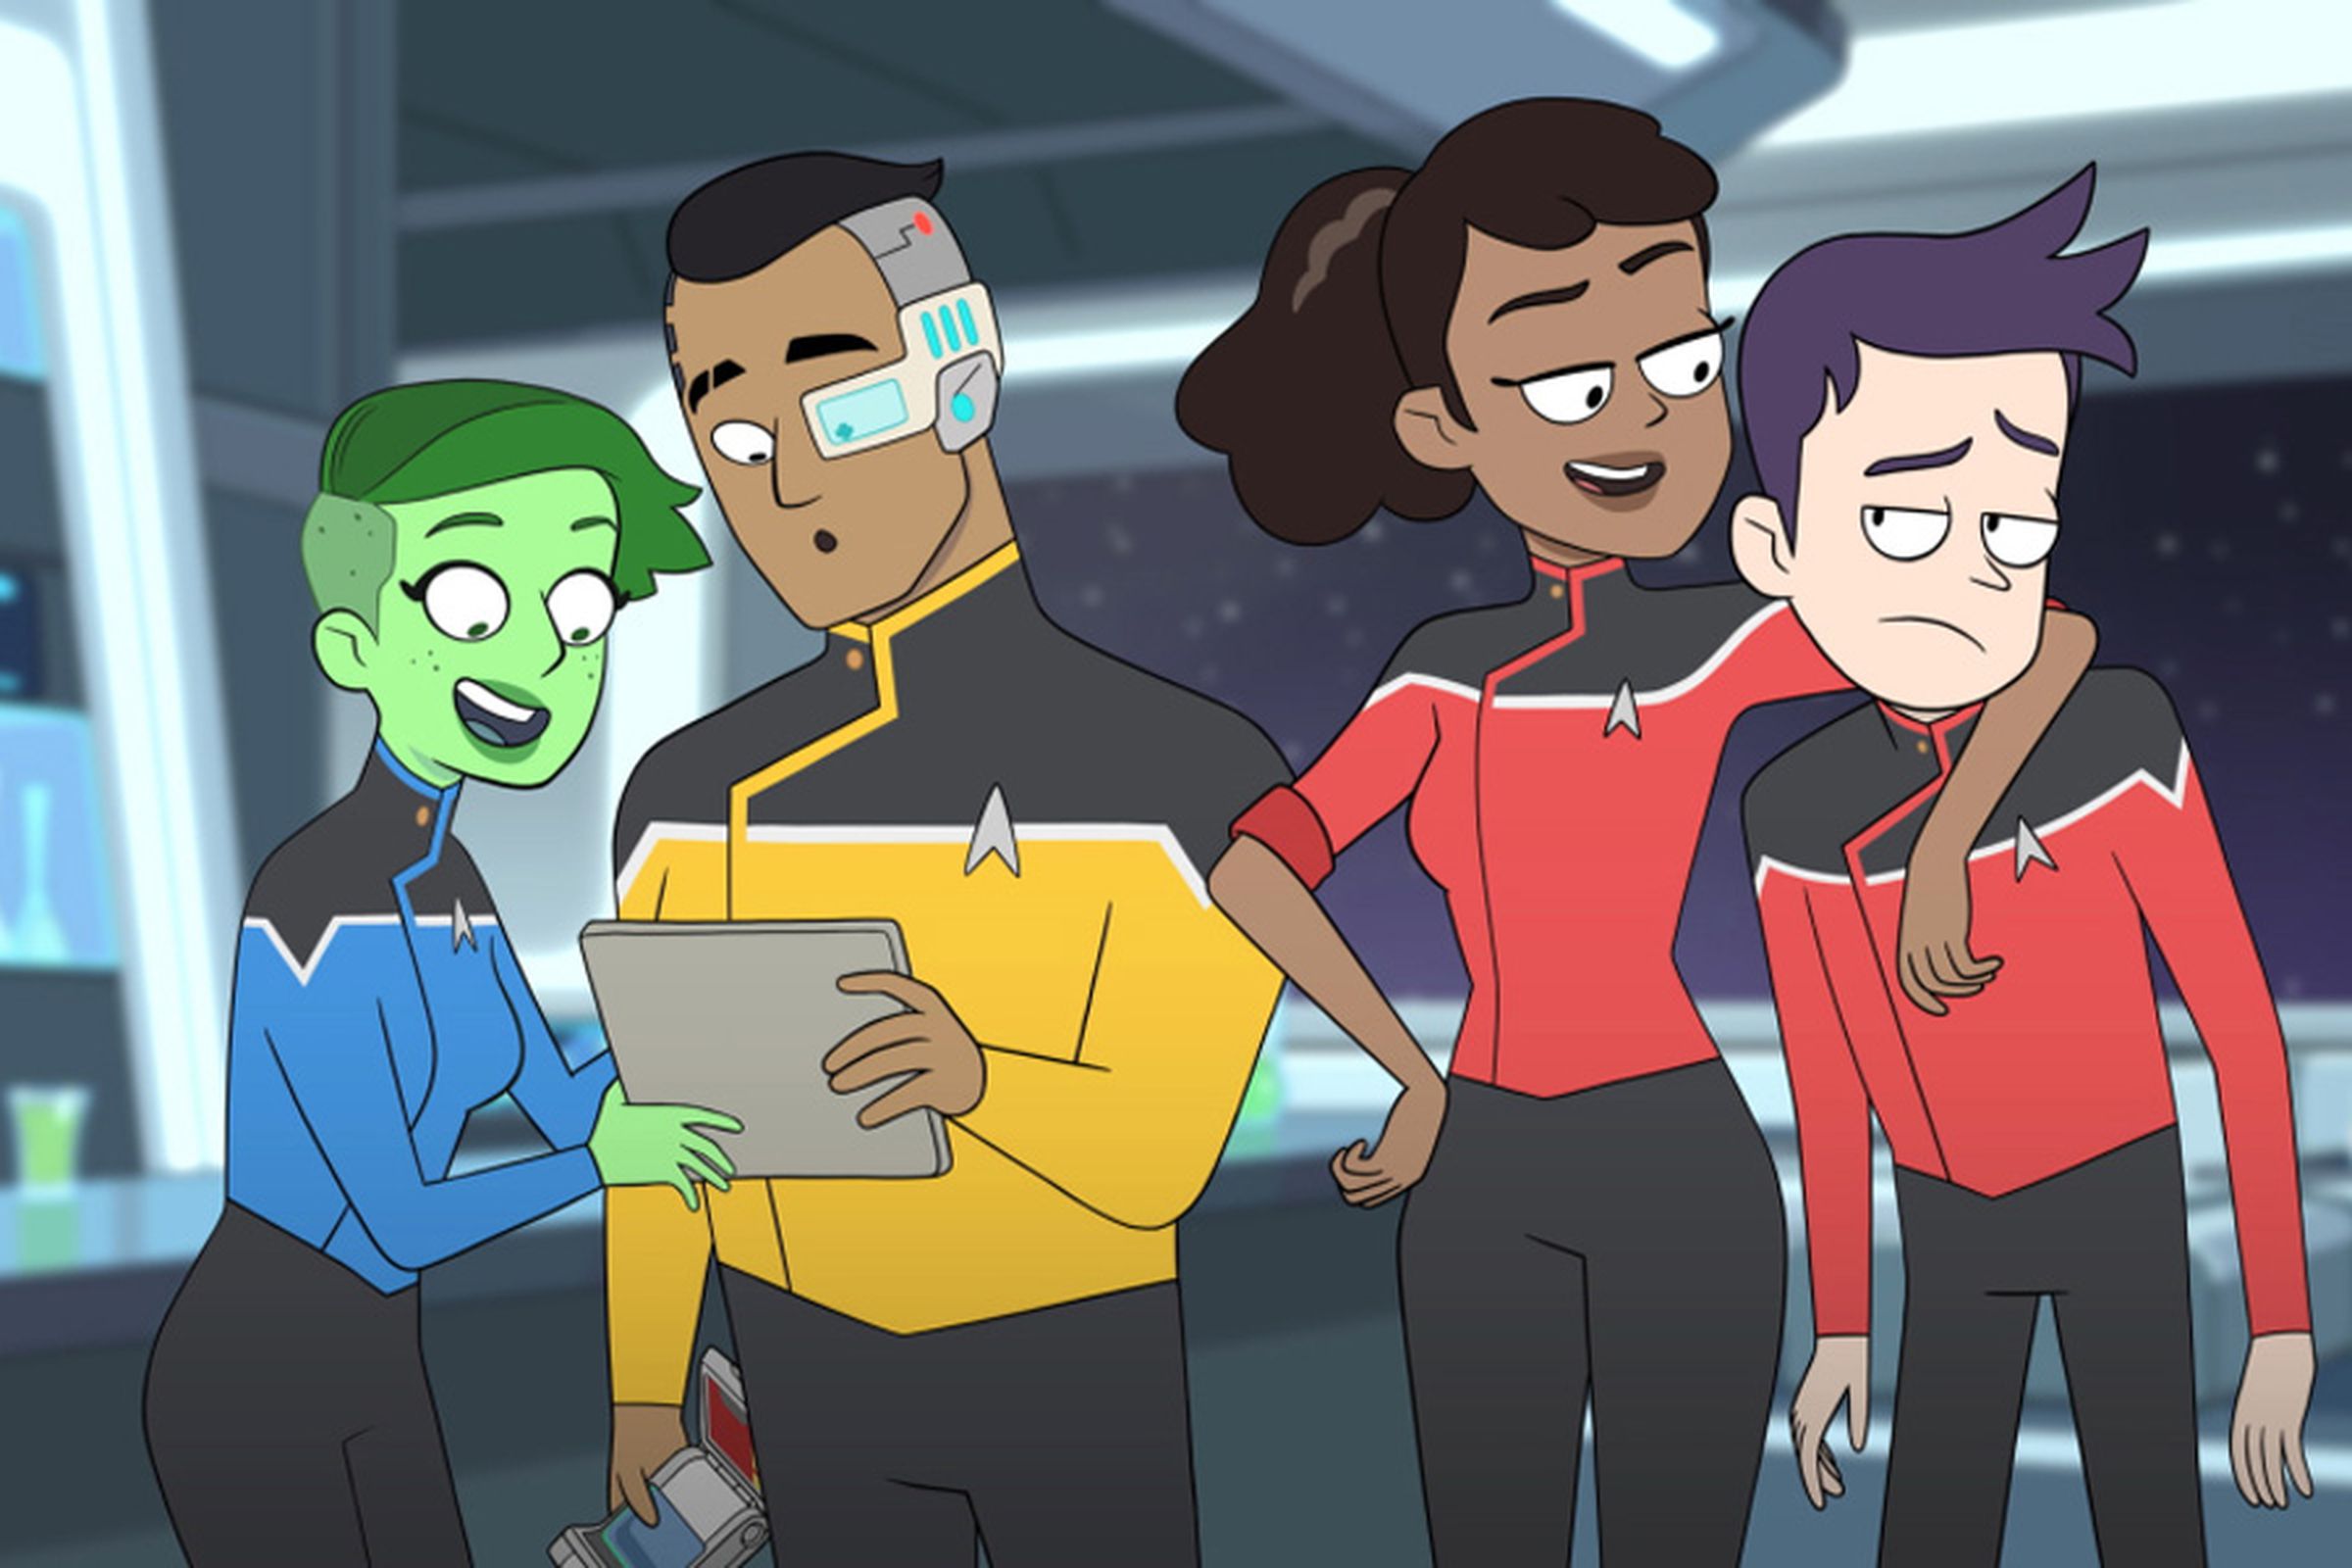 From left to right: a green humanoid woman in black pants and a blue shirt, a man with an undercut wearing black pants and a yellow shirt, a woman wearing black pants and a red shirt with her sleeves rolled up, and an uncomfortable-looking person with purple hair, black pants, and a red shirt.